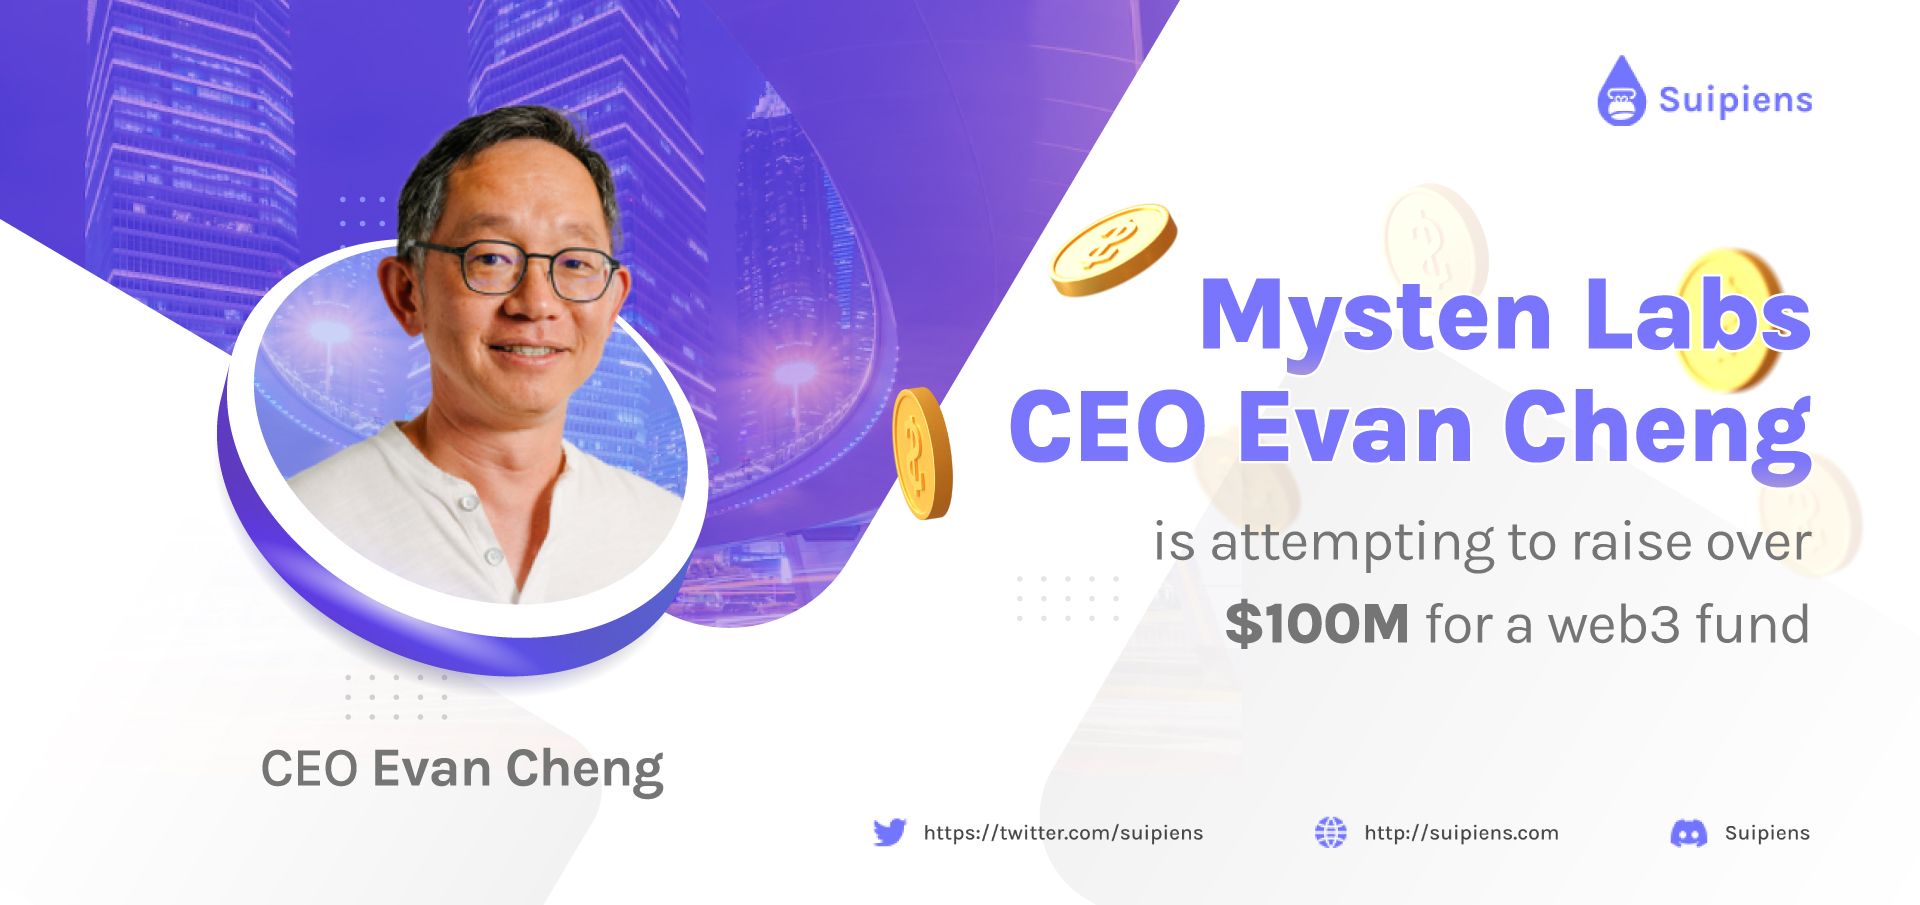 Mysten Labs CEO Evan Cheng Is Attempting To Raise Over $100M For A Web3 Fund